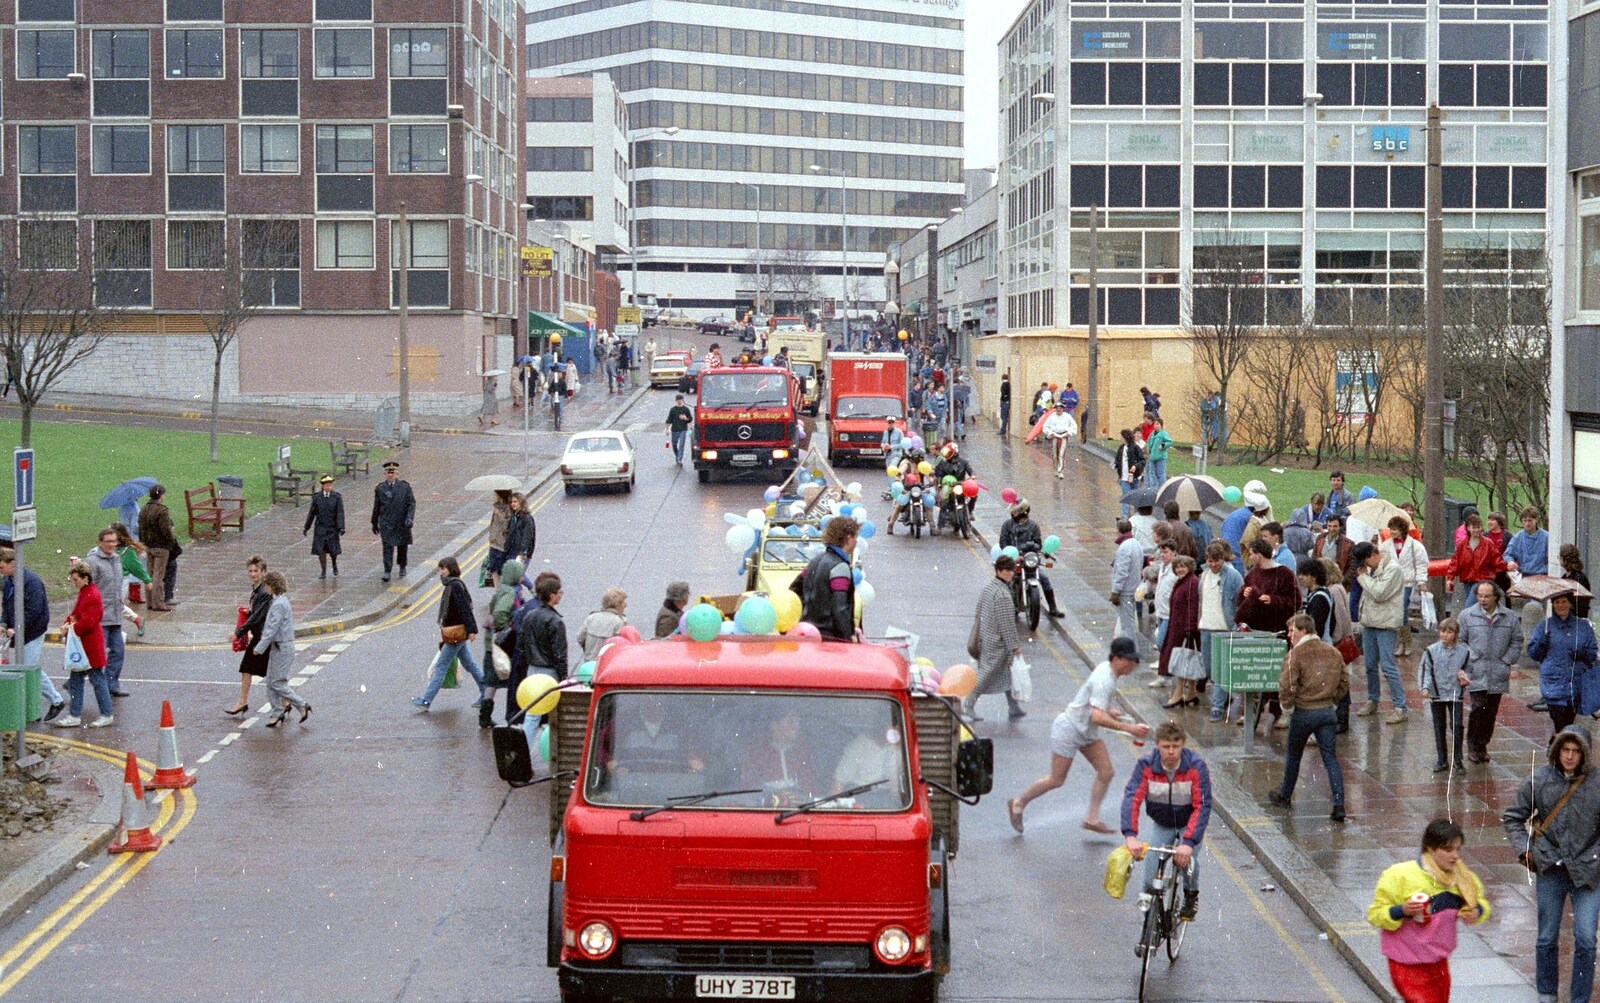 Mayflower Street from the top of a bus from Uni: The PPSU Pirate RAG Parade, Plymouth, Devon - 14th February 1987